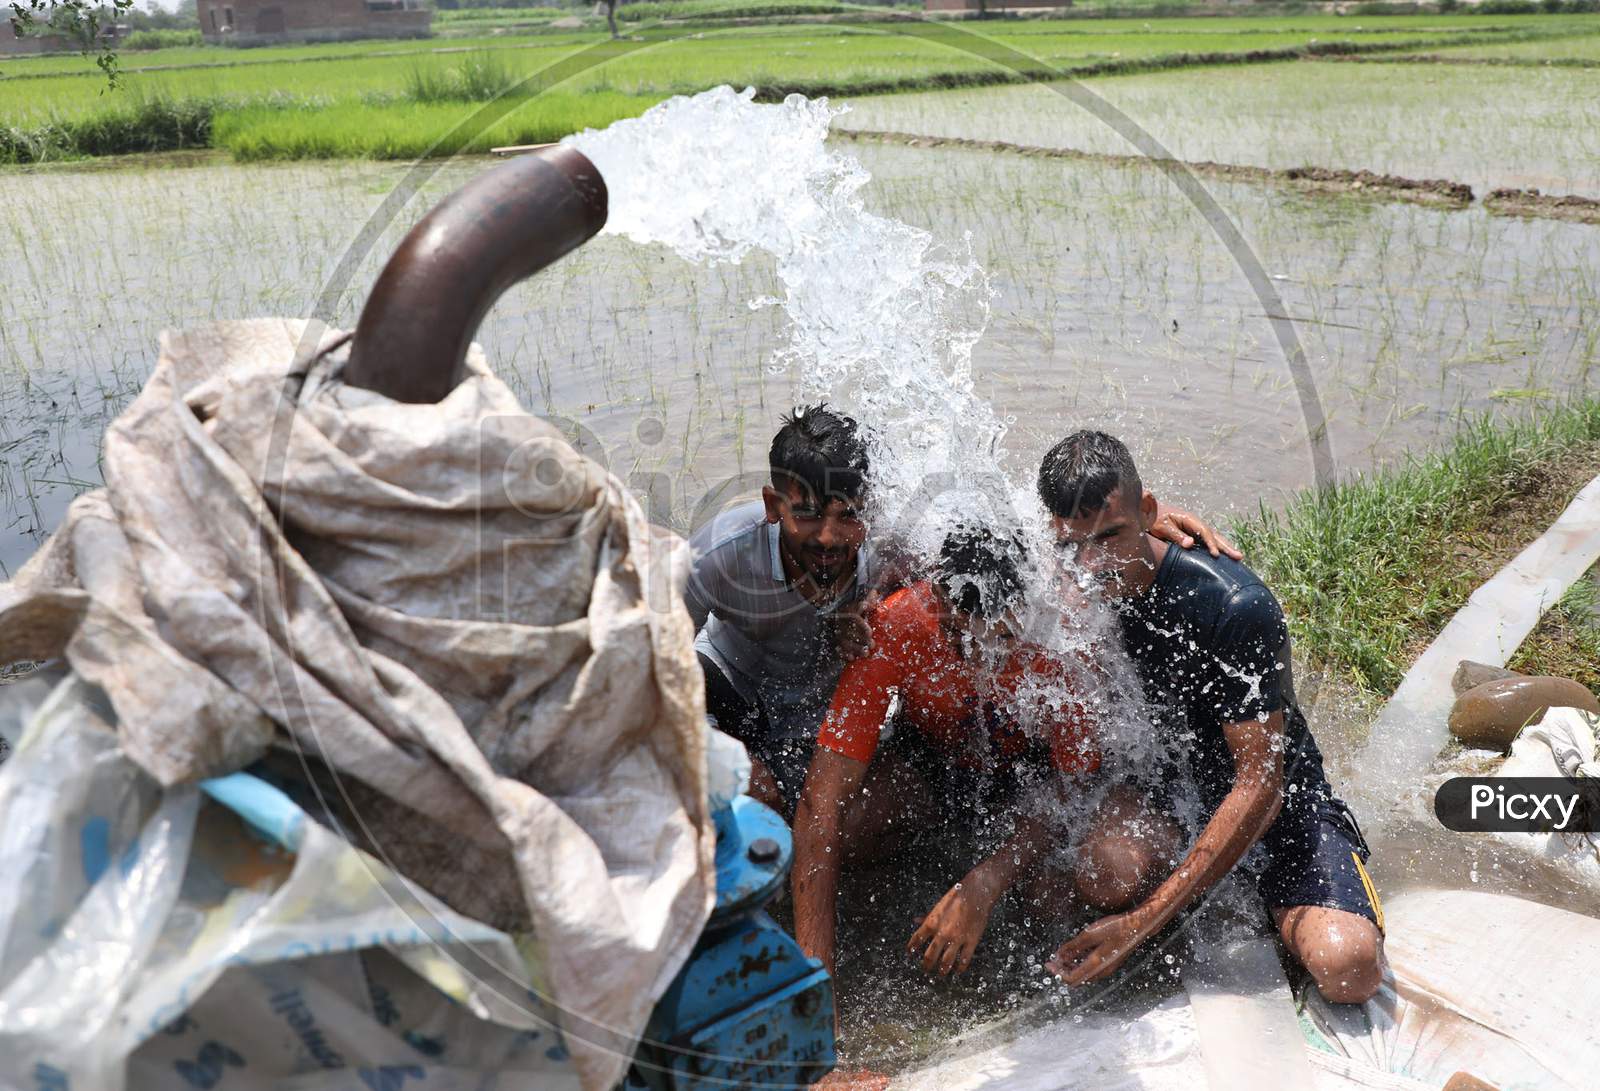 Three young men enjoy the cool splash from a tube well on a hot summer day during Unlock 2.0 in Jammu on July 03, 2020.